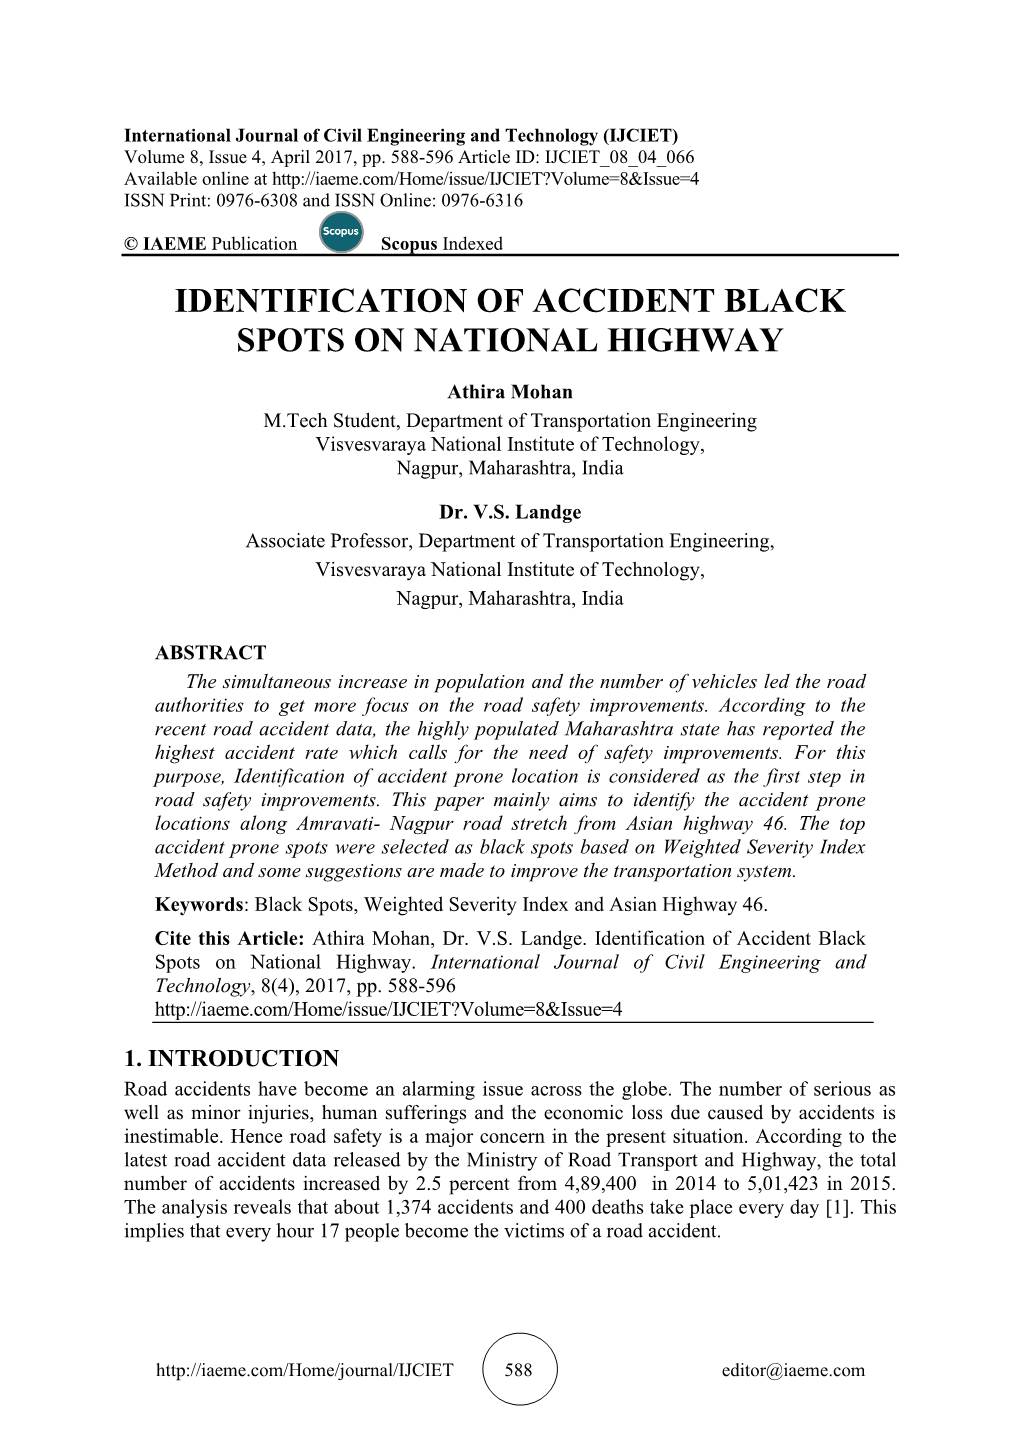 Identification of Accident Black Spots on National Highway